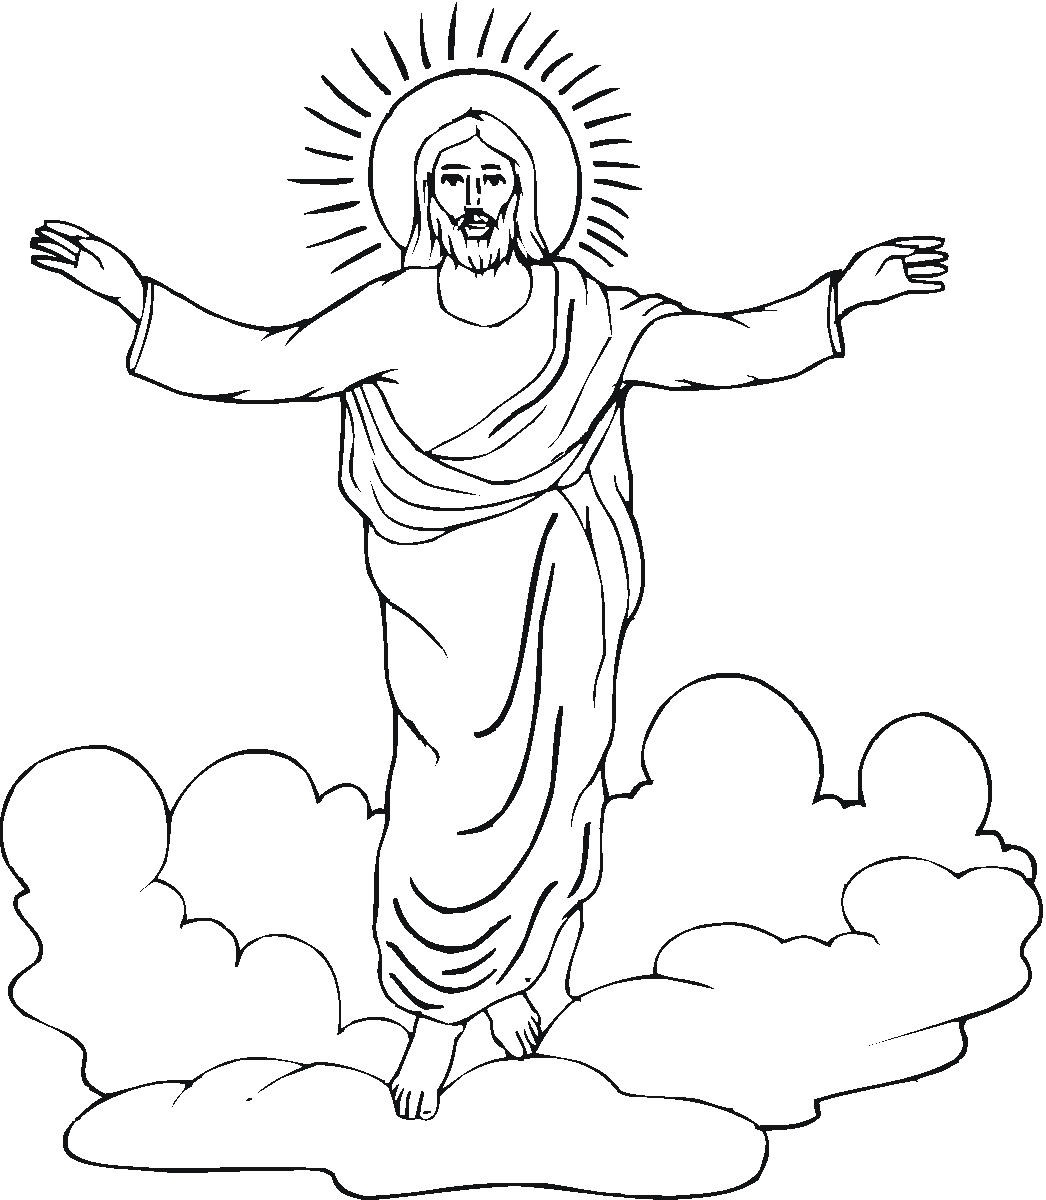 EASTER COLOURING RELIGIOUS EASTER COLORING PICTURE